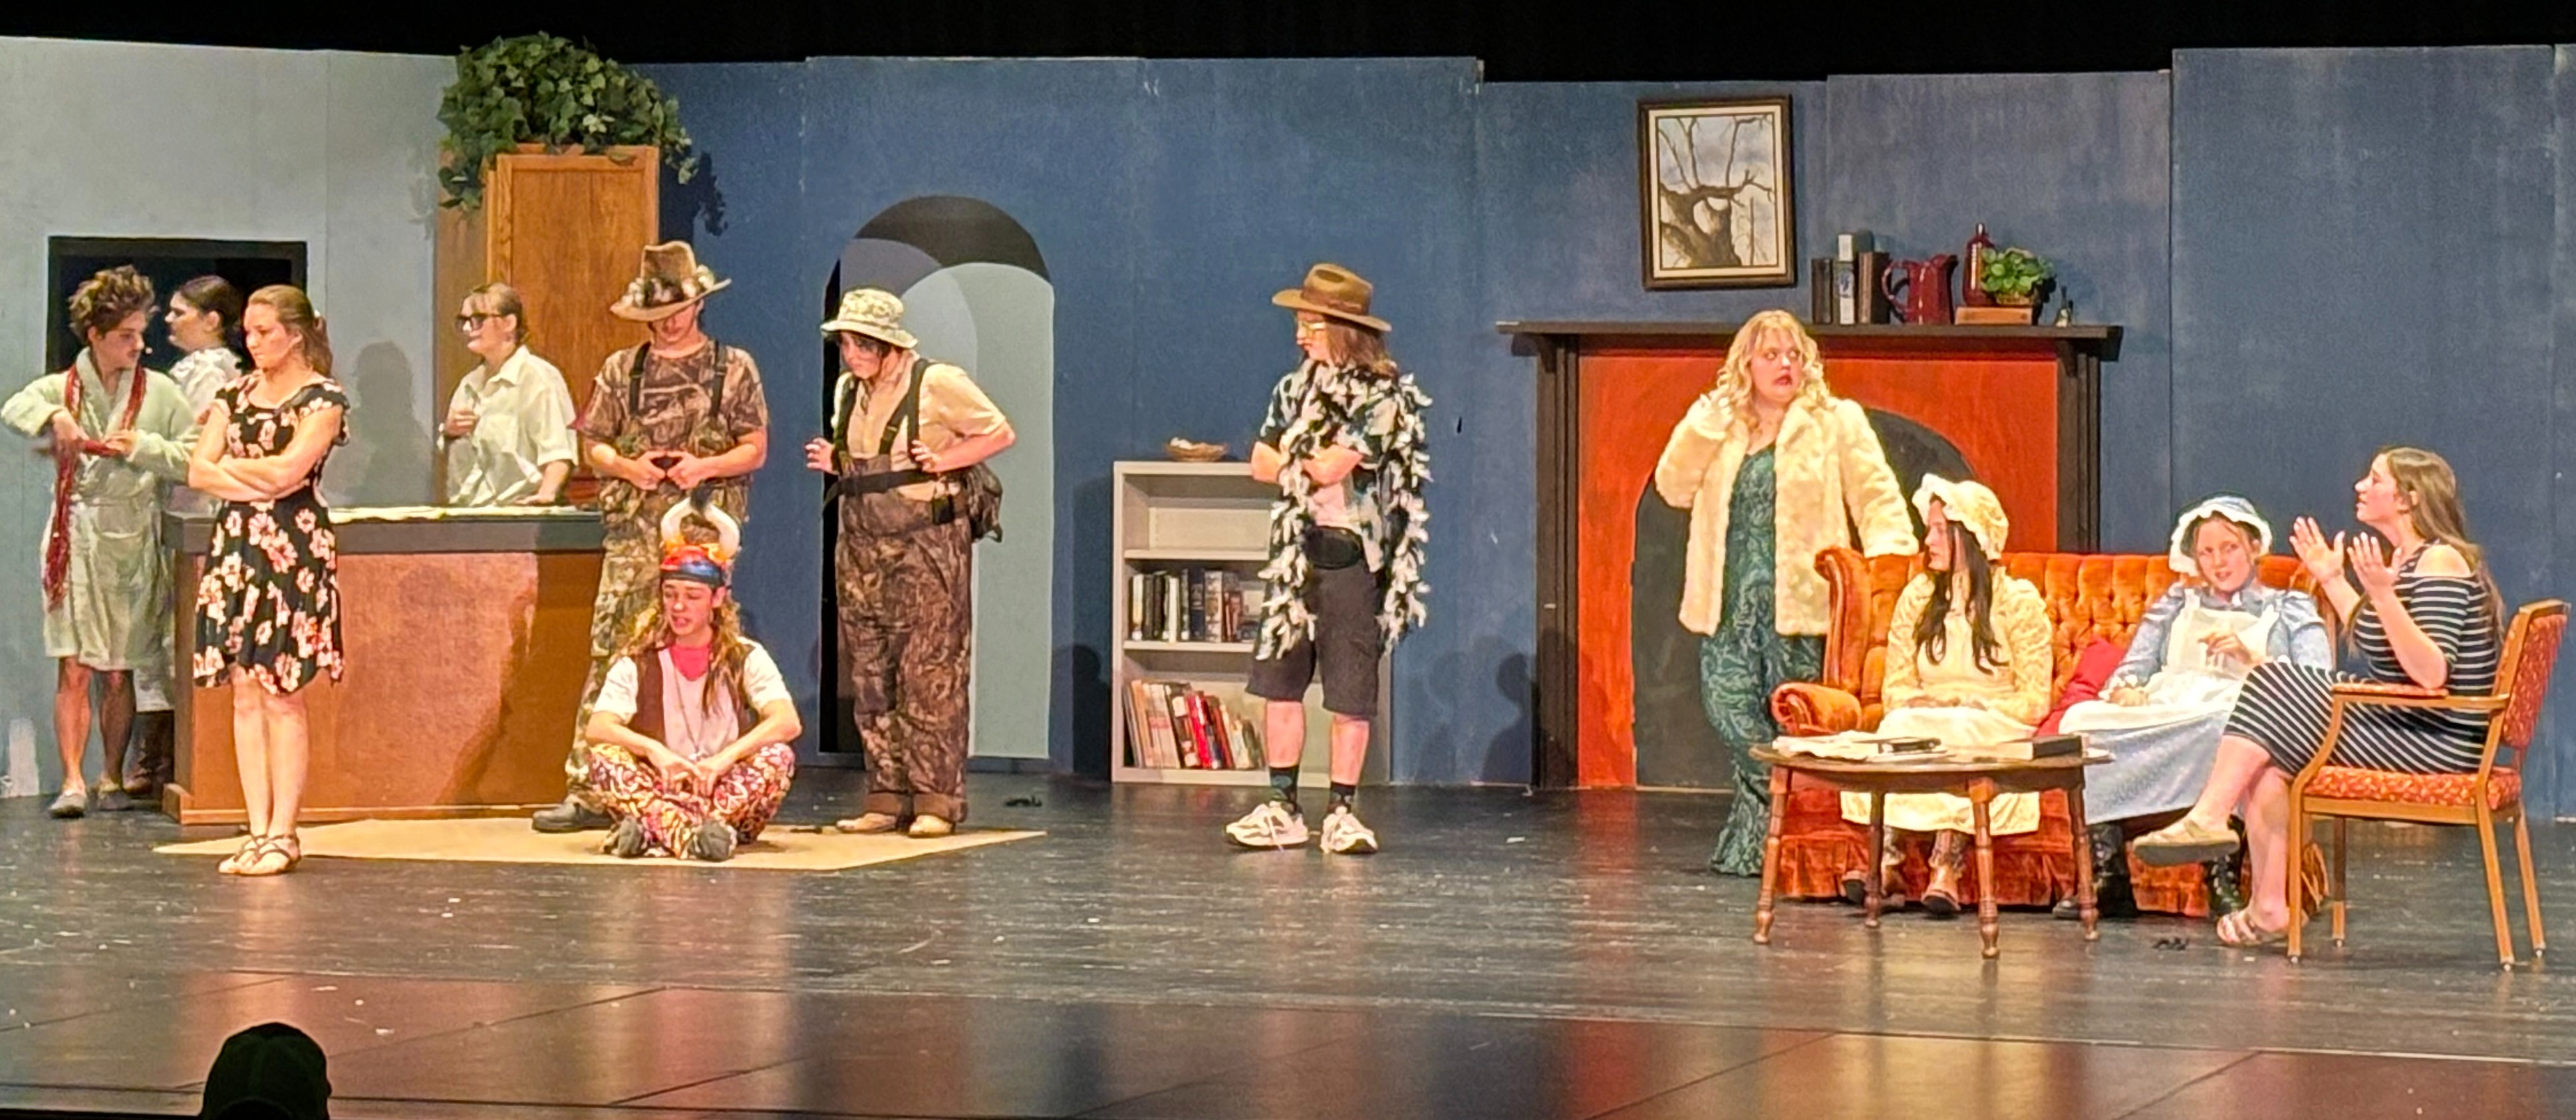 High School Play - "A Family Reunion to Die For"